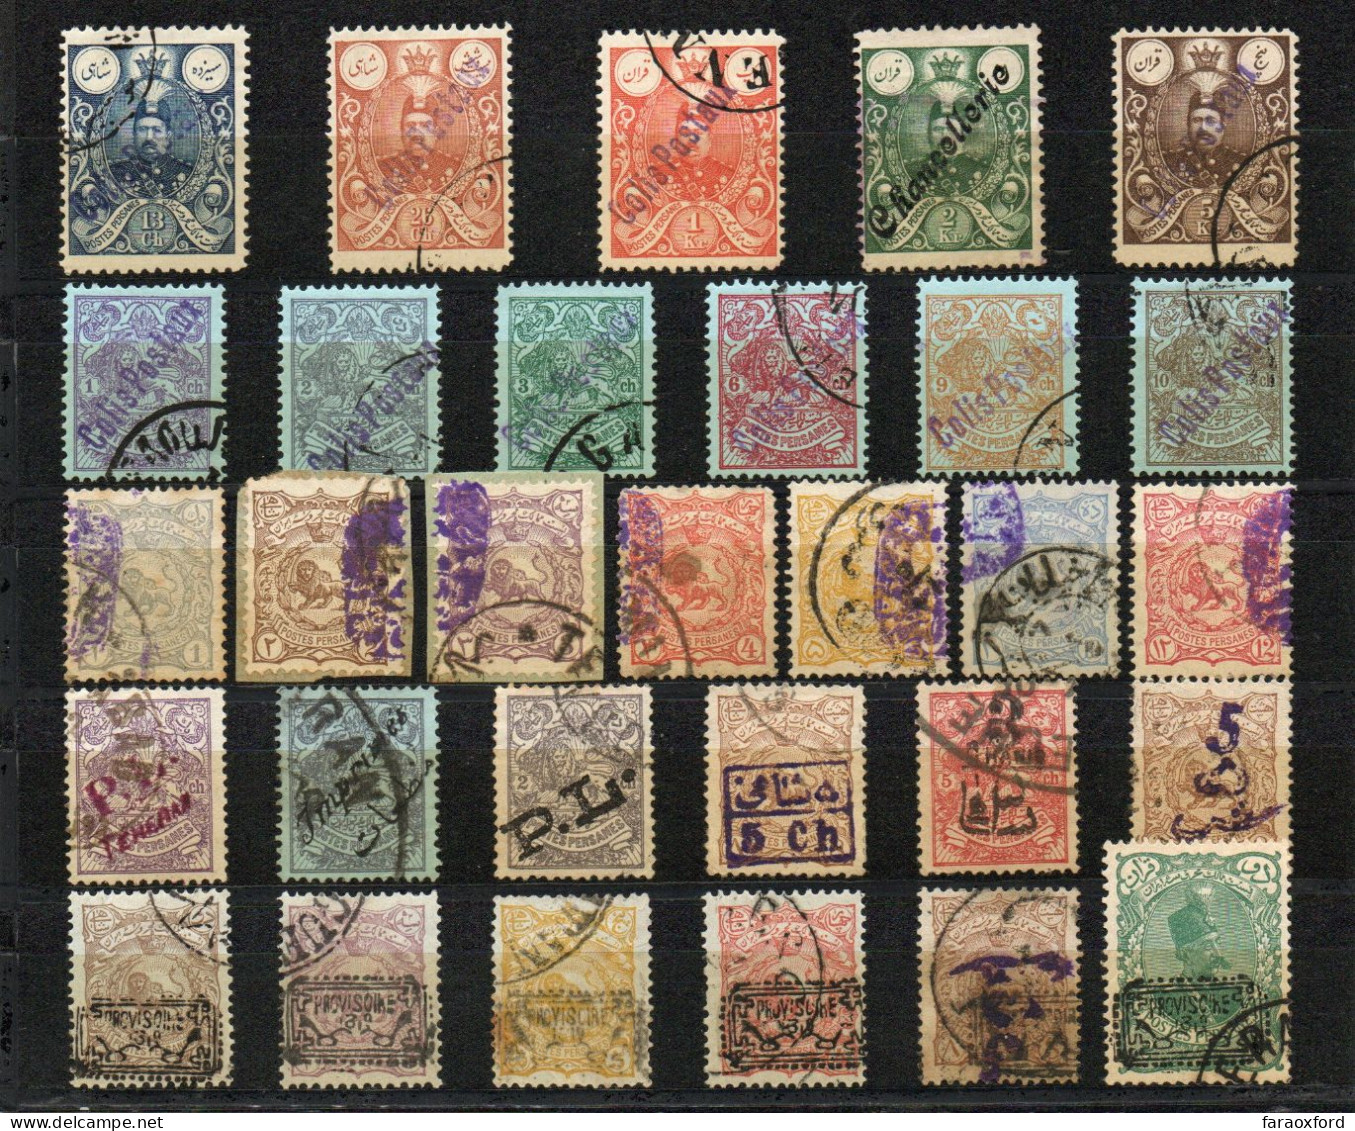 IRAN - ايران - PERSIA - 1894 To 1907 - COLLECTION OF 30 STAMPS - WITH RARE OVERPRINTS - VERY GOOD USED - Irán